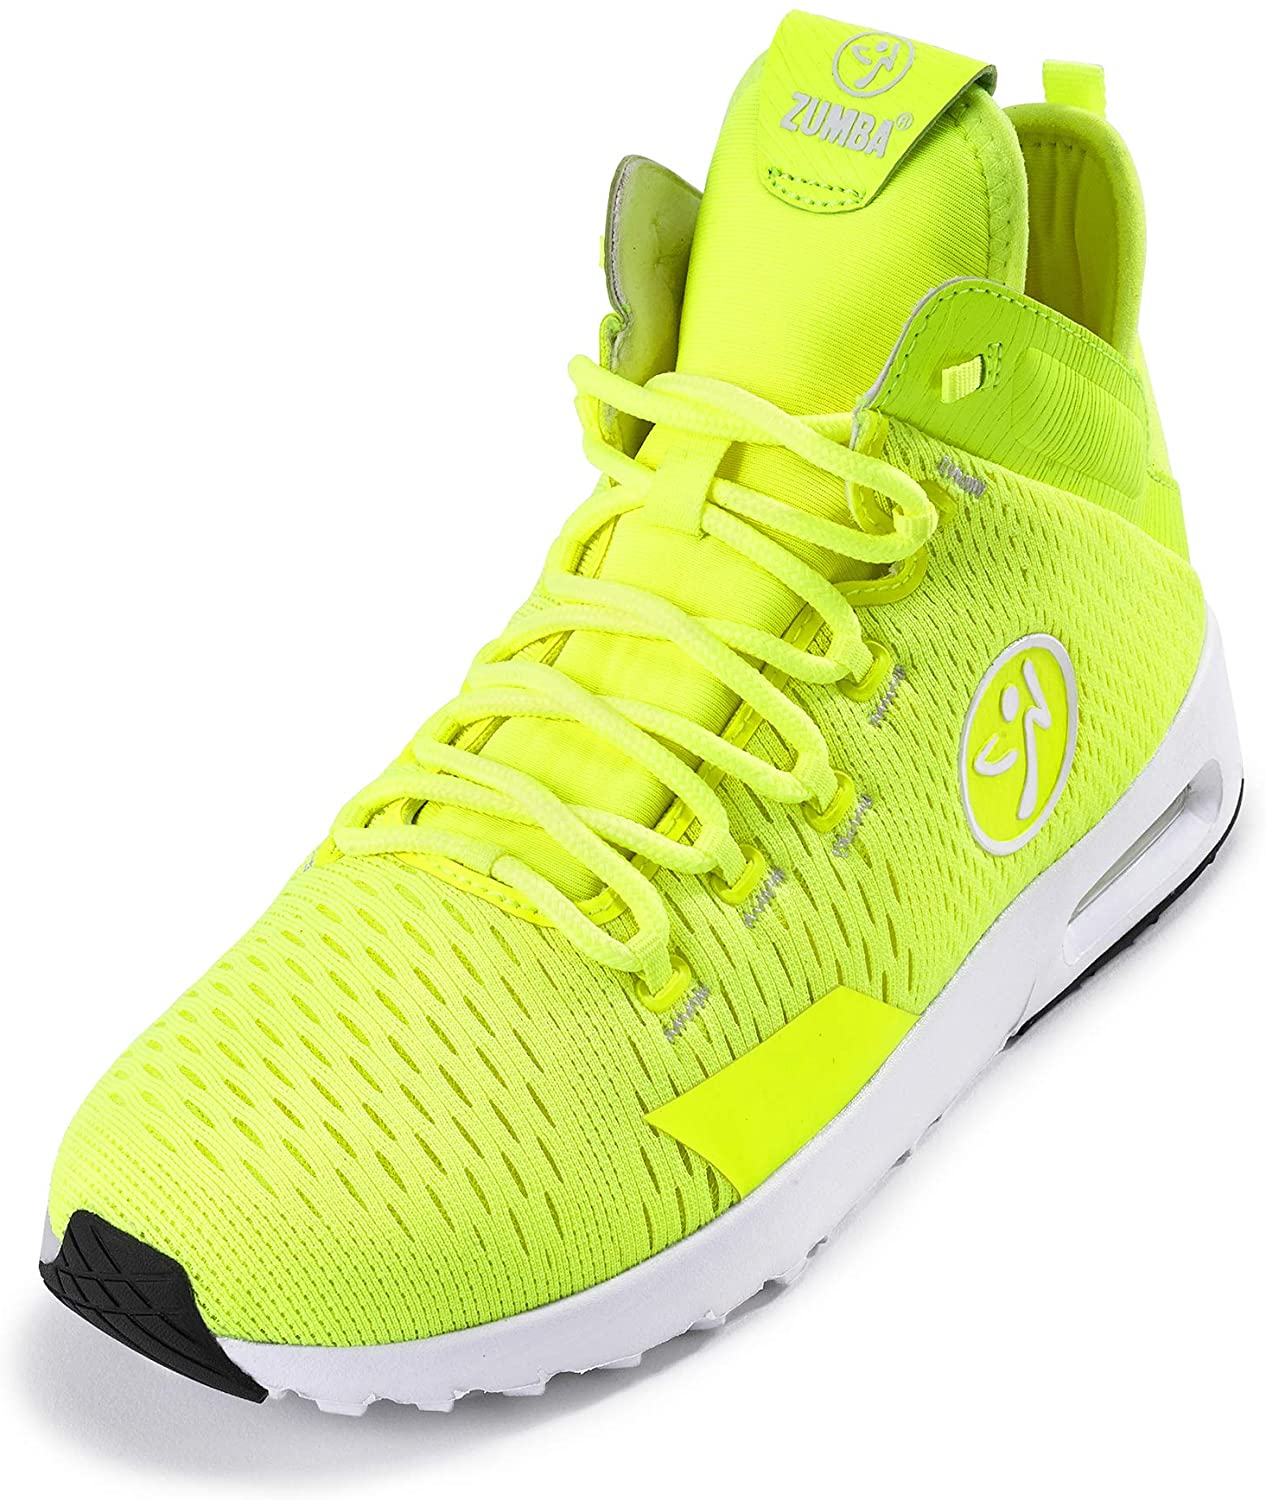 ZUMBA Sneakers, Low-Top Shoes for Women, Air Classic